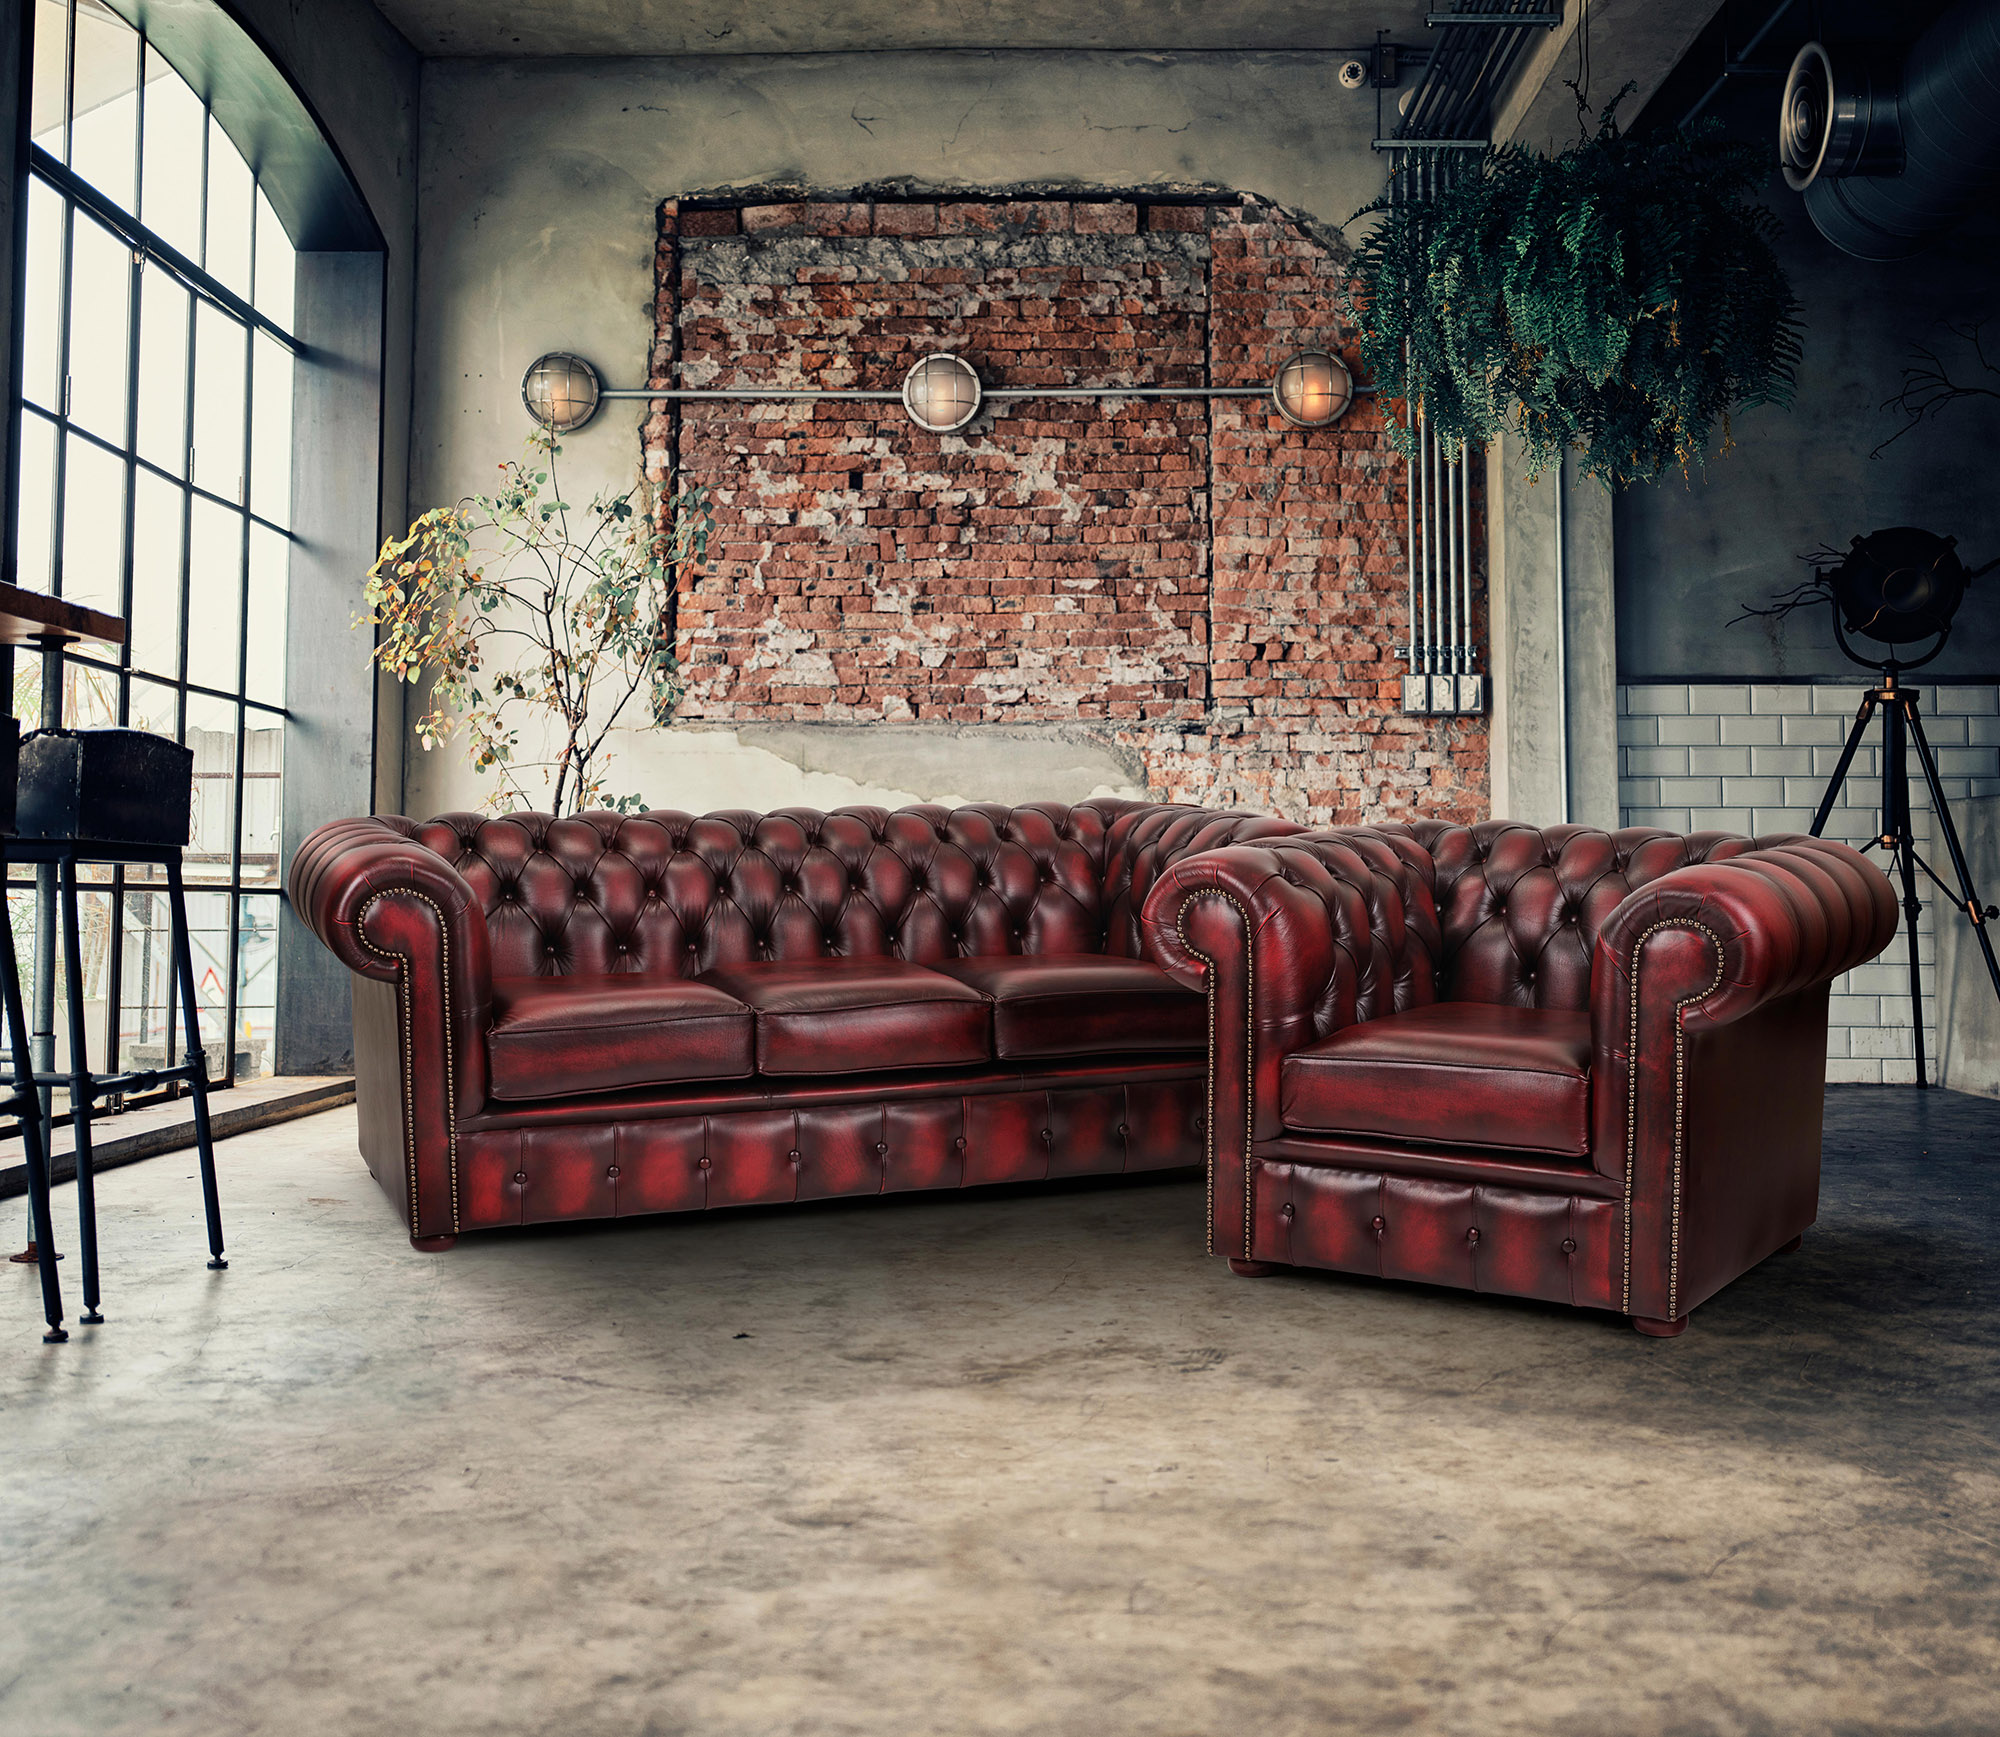 How to Style a Chesterfield Sofa in Your Home